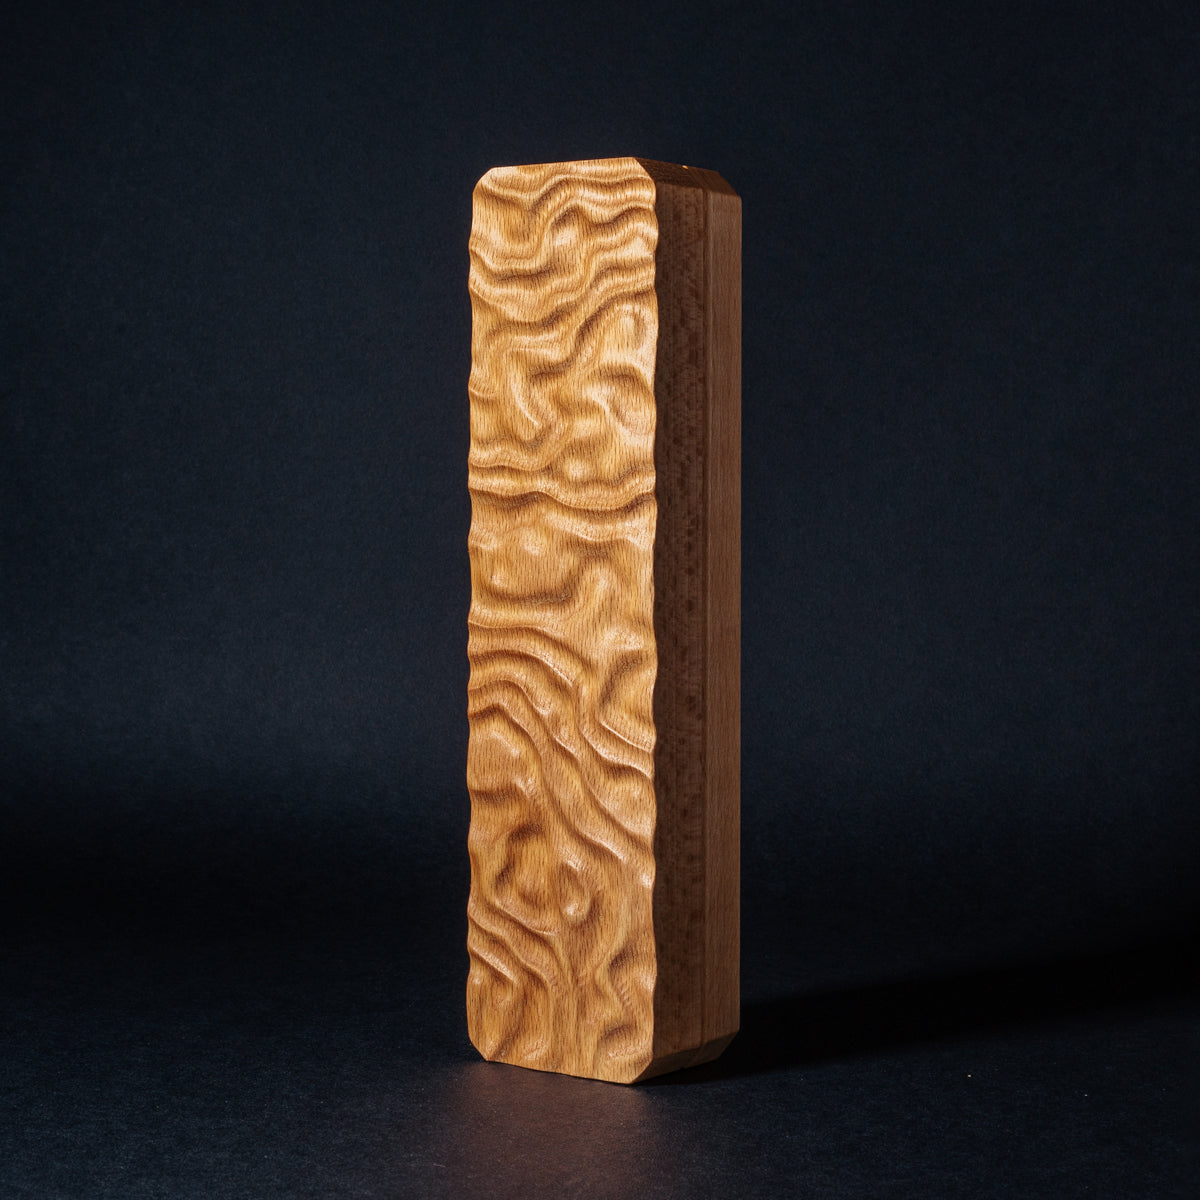 Vertical Jewellery Box made of beech wood with a 3d pattern on the outside